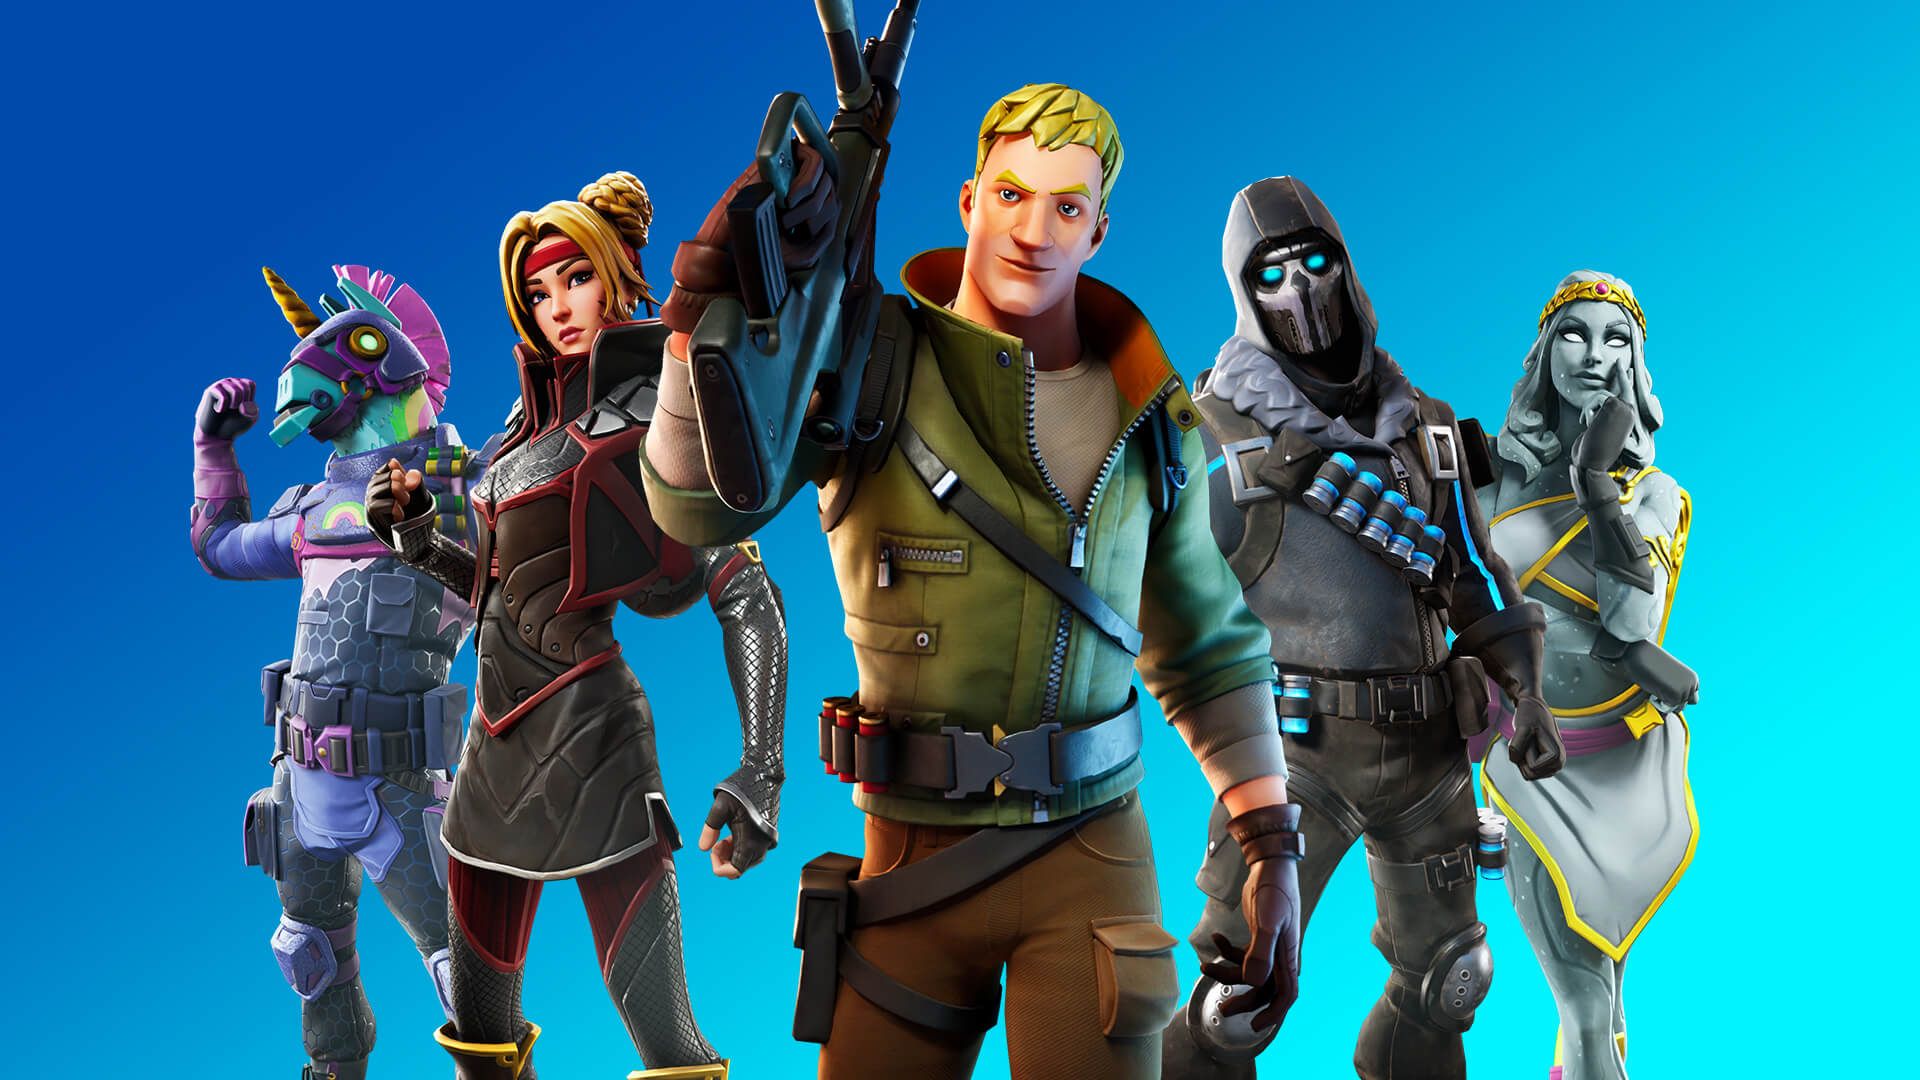 Fortnite To Support Microsoft DirectX 12 With Update v11.20